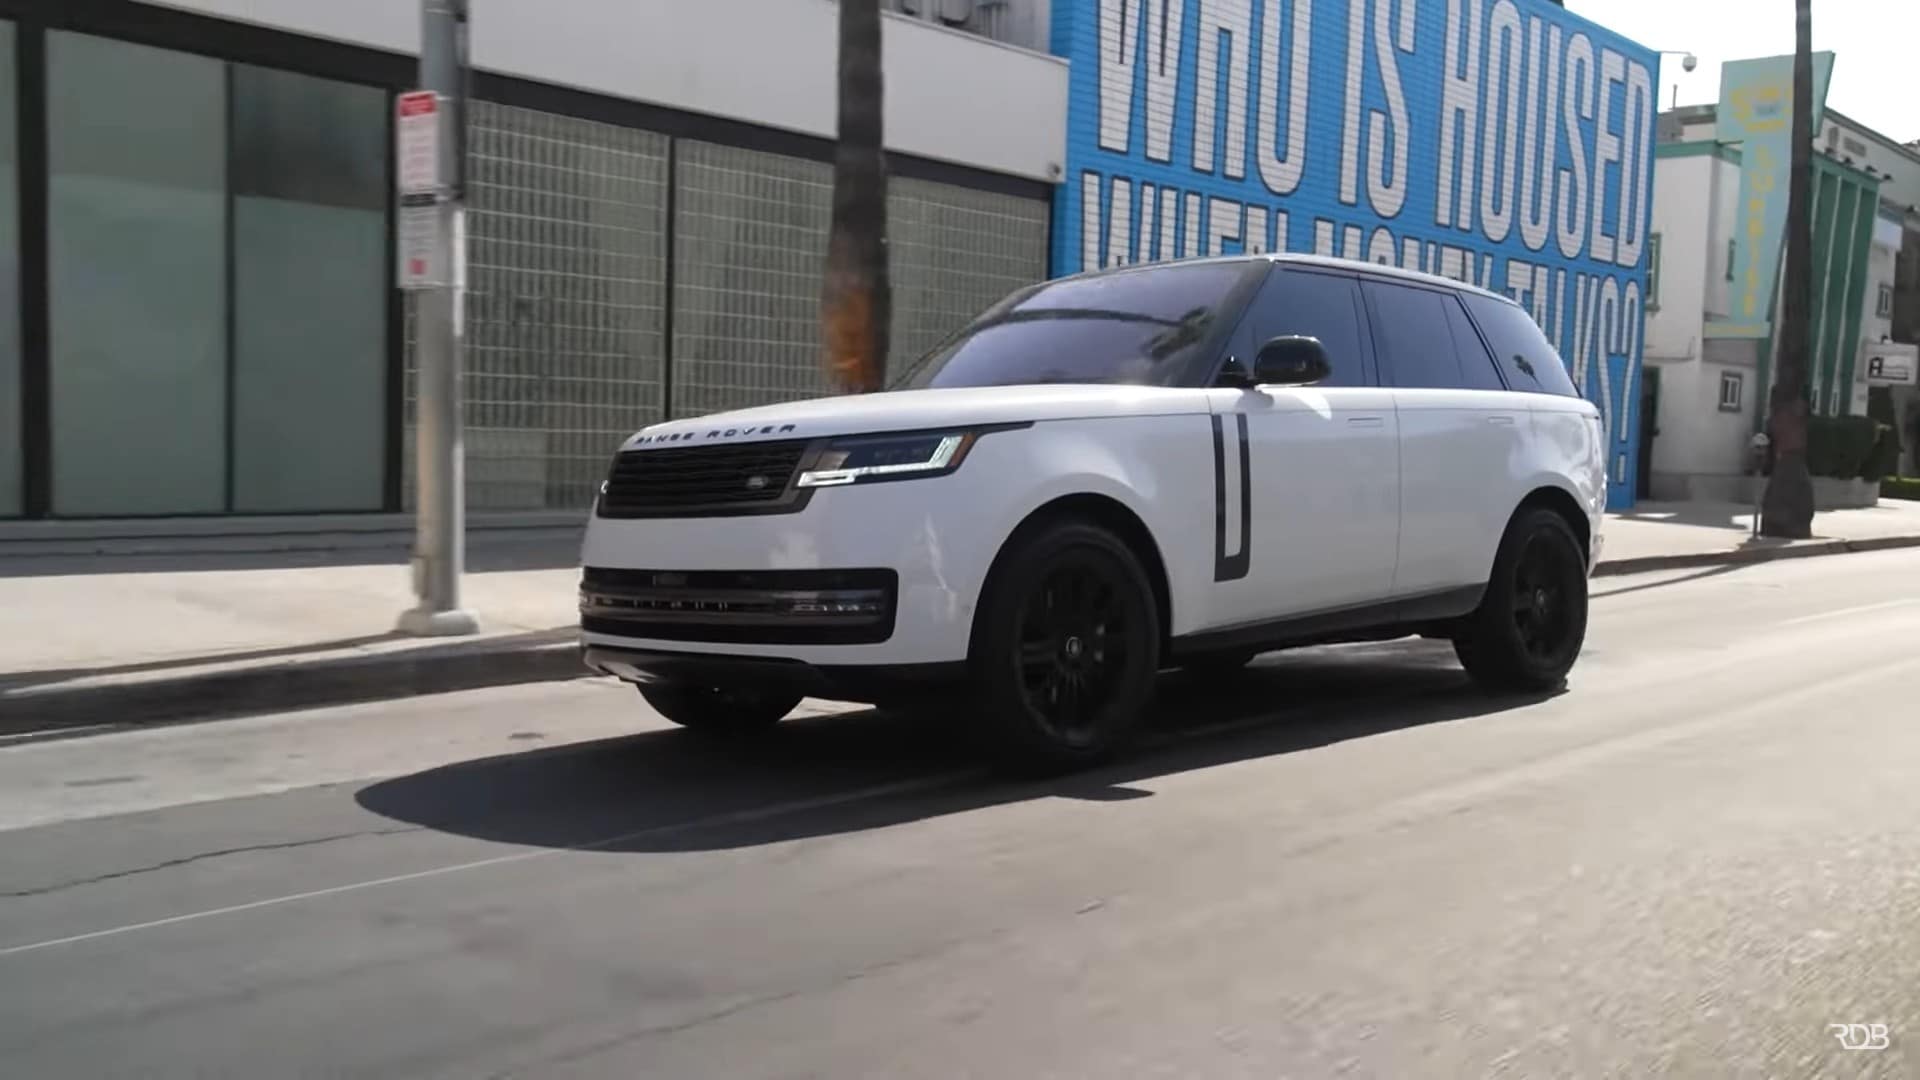 2023 LAND ROVER RANGE ROVER SPORT PREVIEW - MAY 10TH | Land Rover Hinsdale